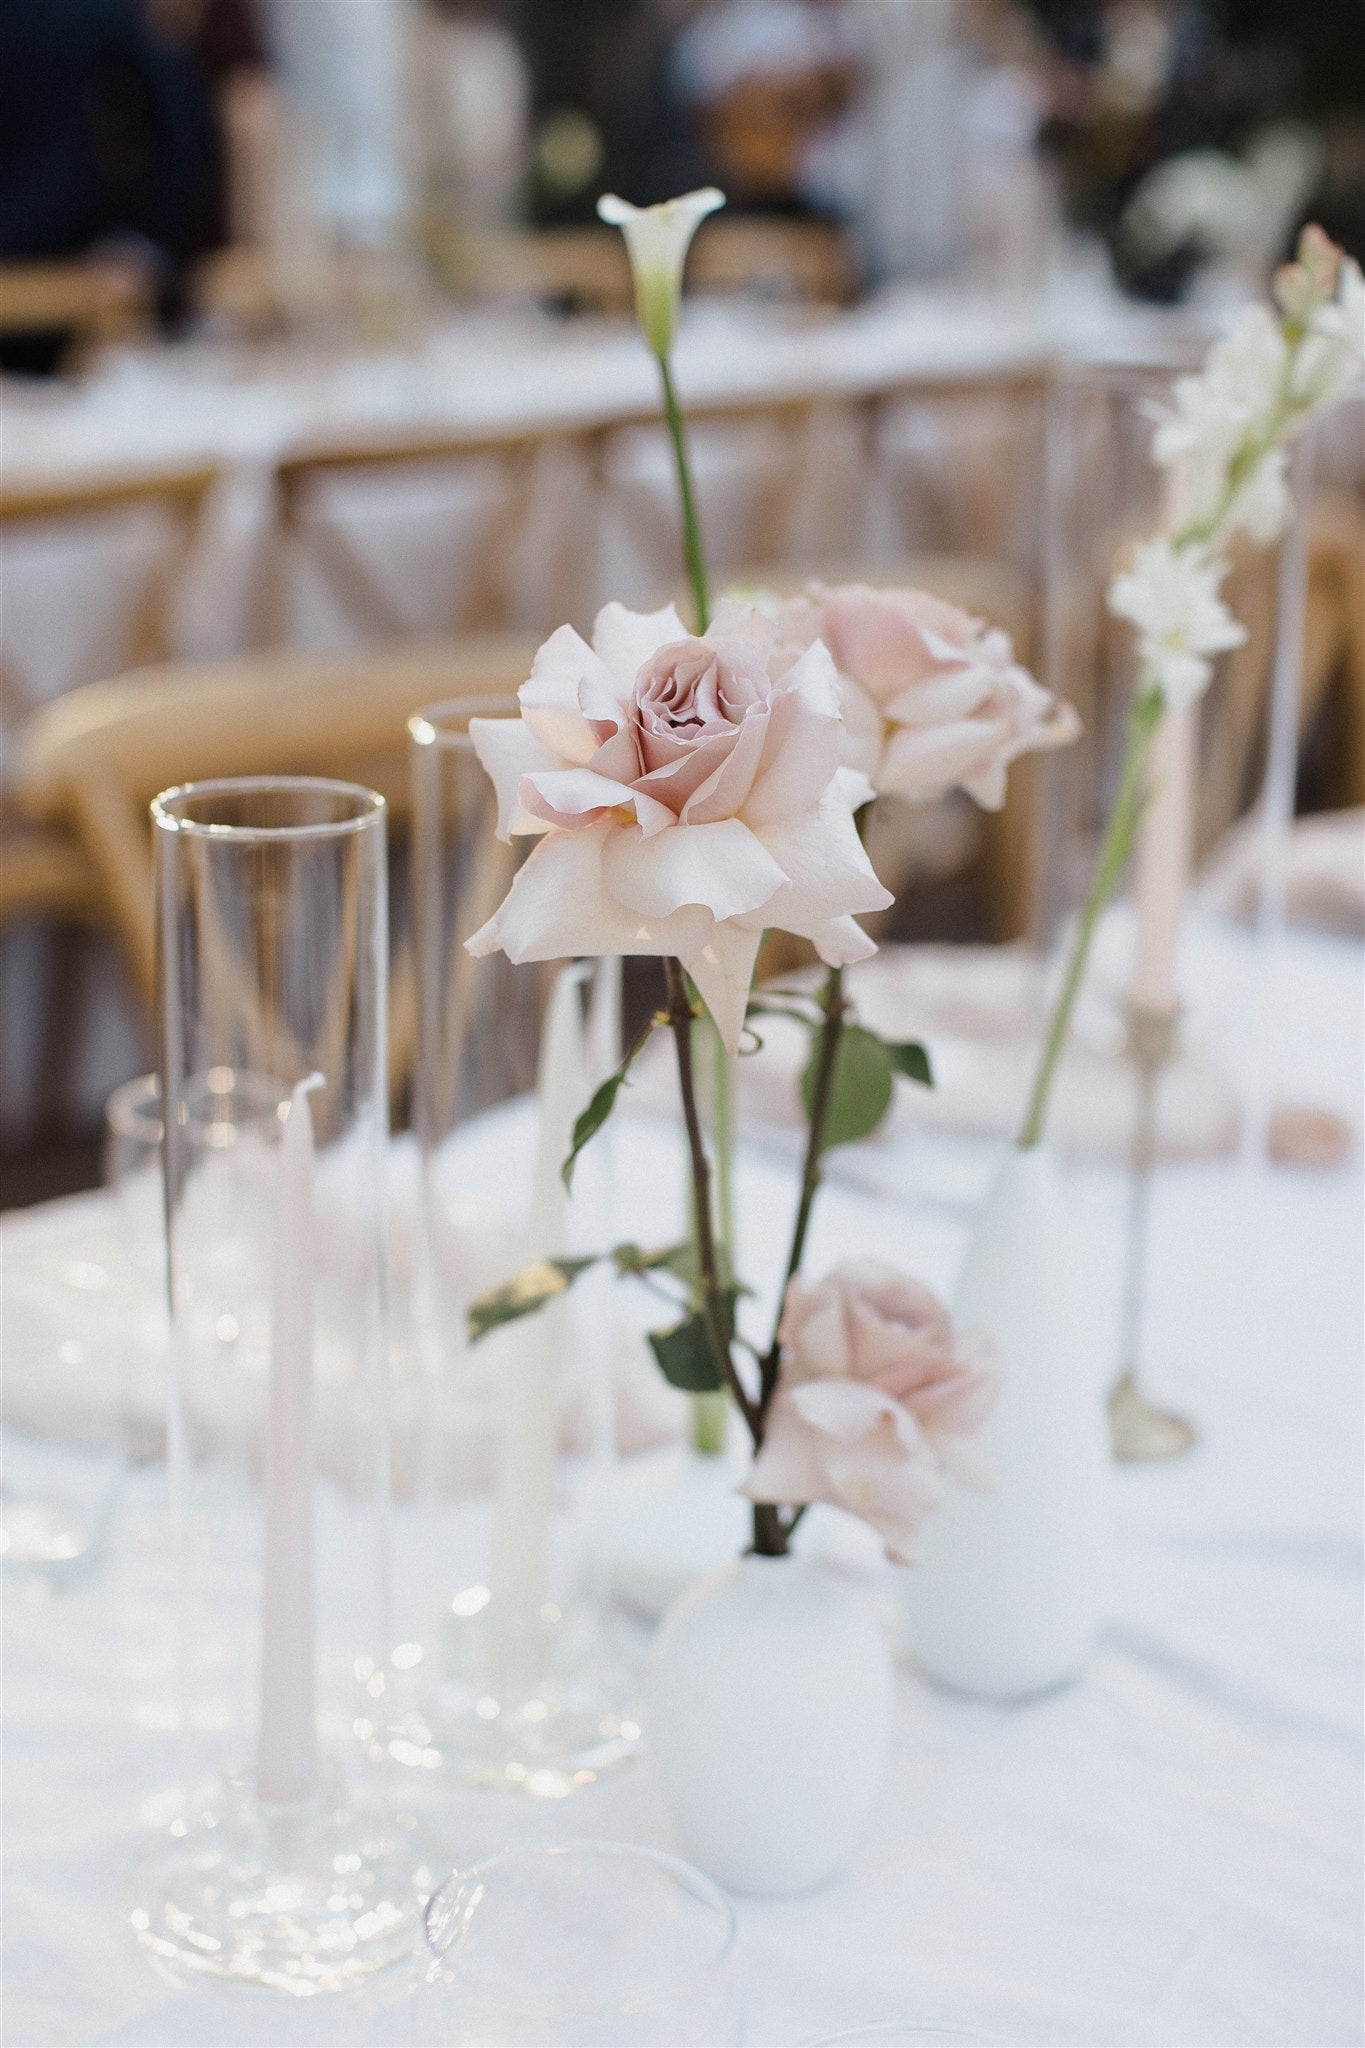 Slim Glass Cylinder Candle Holders for Hire | For Love & Living Gold Coast Weddings & Events